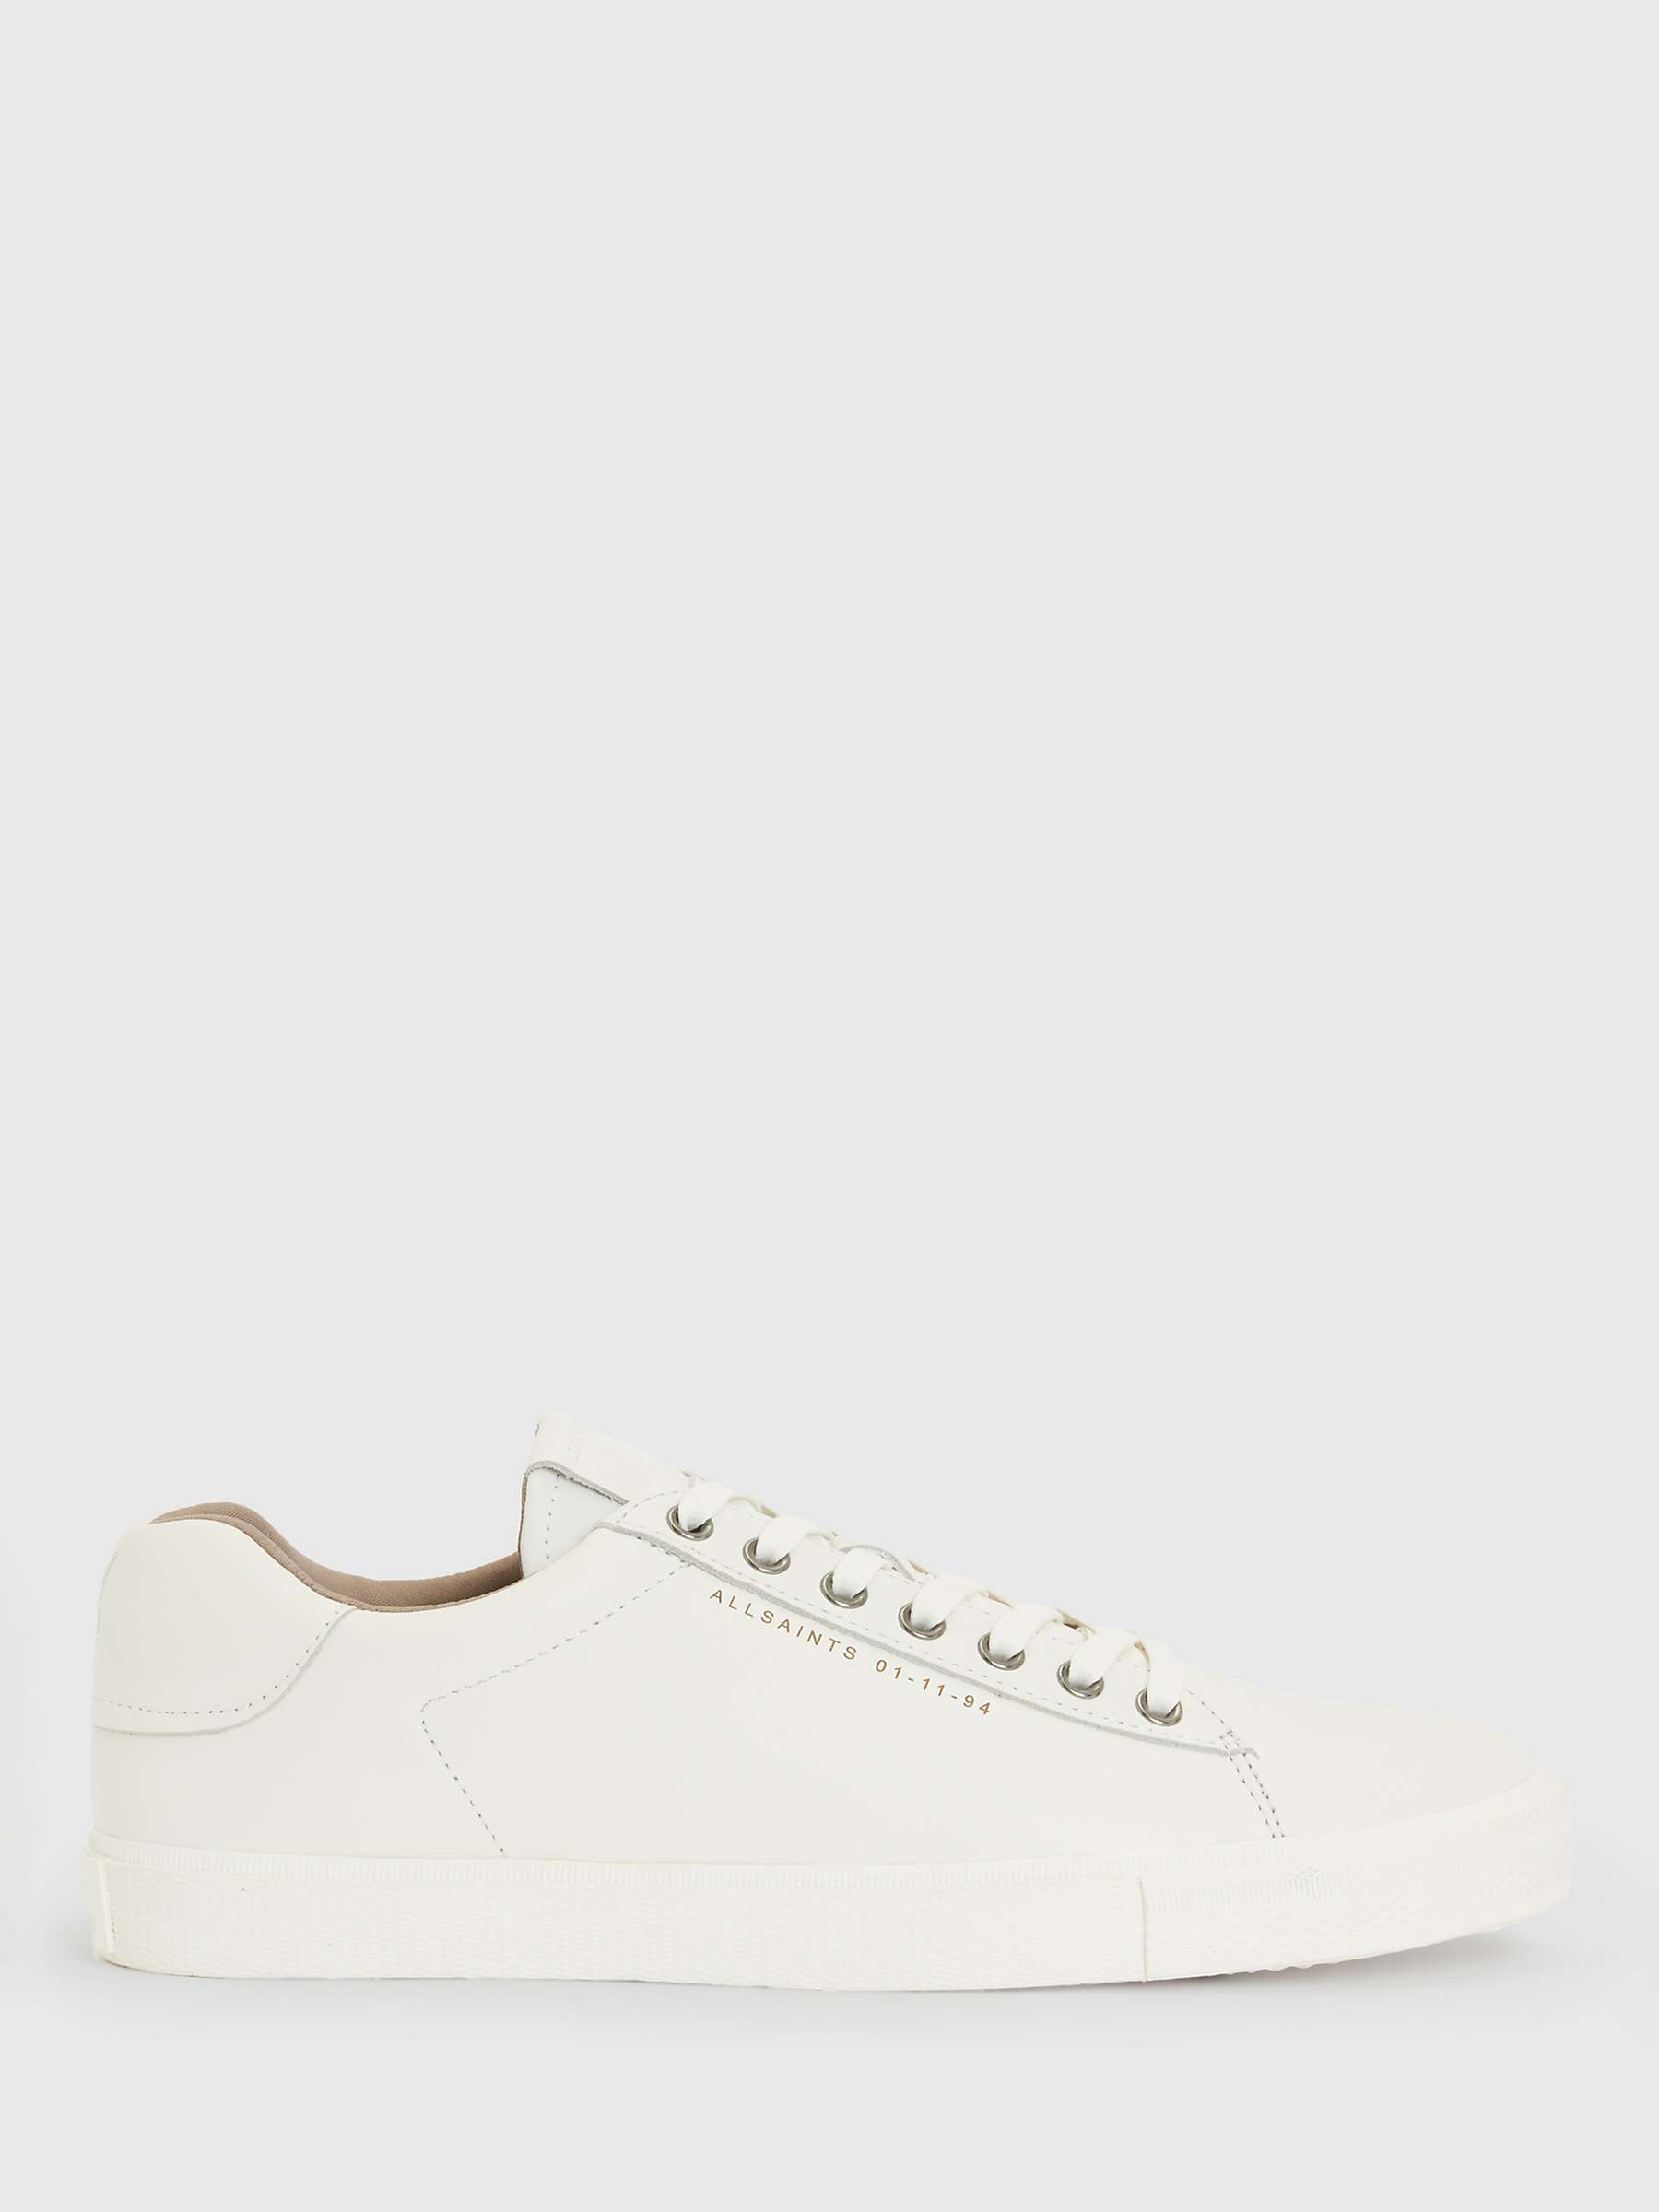 AllSaints Brody Leather Low Top Trainers, White at John Lewis & Partners